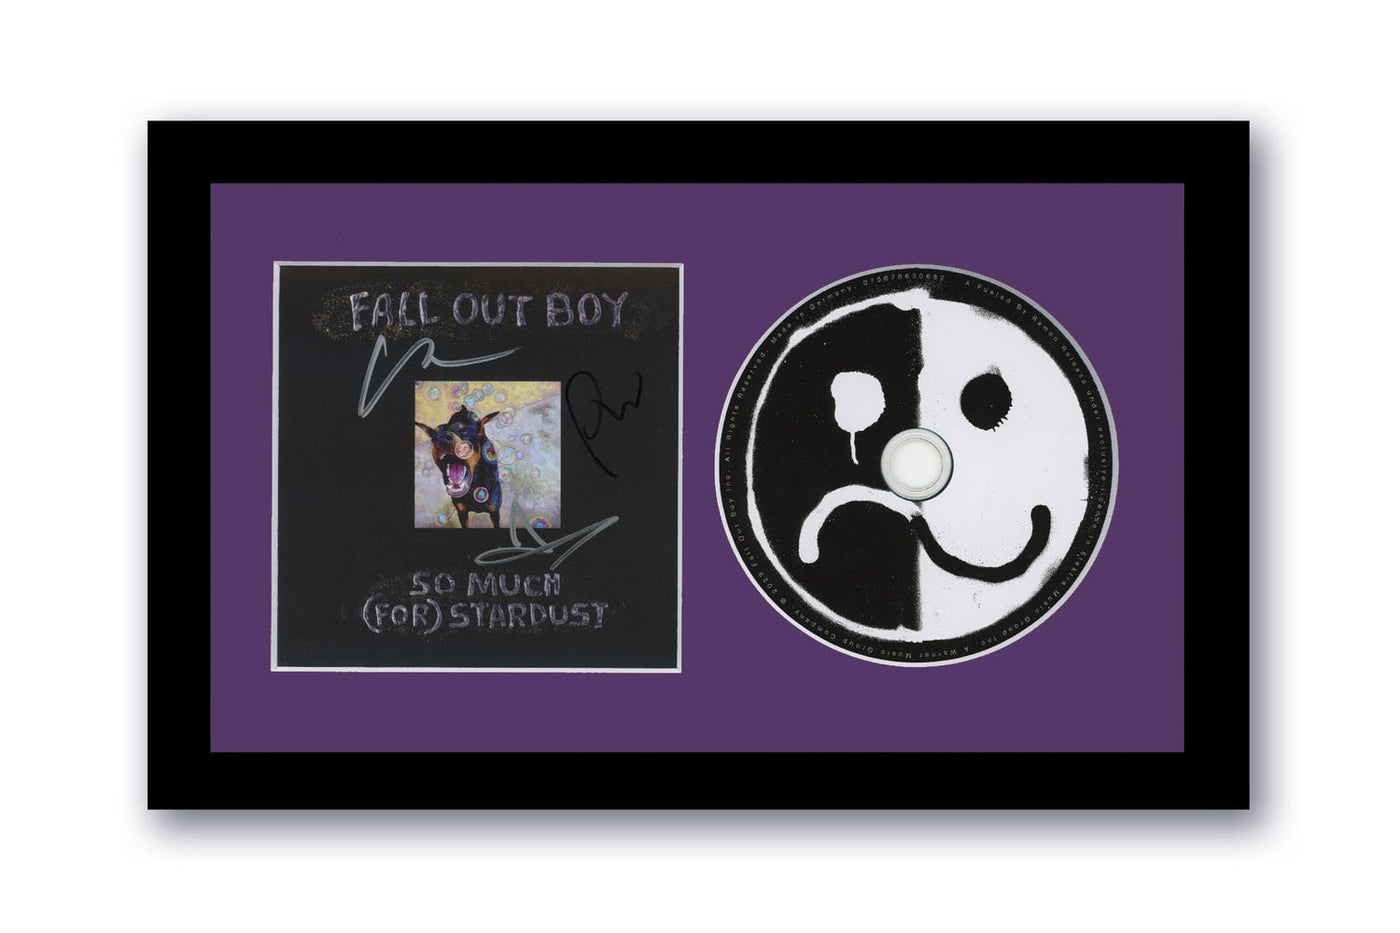 Fall Out Boy Autographed Signed 7x12 Framed CD So Much For Stardust ACOA #3